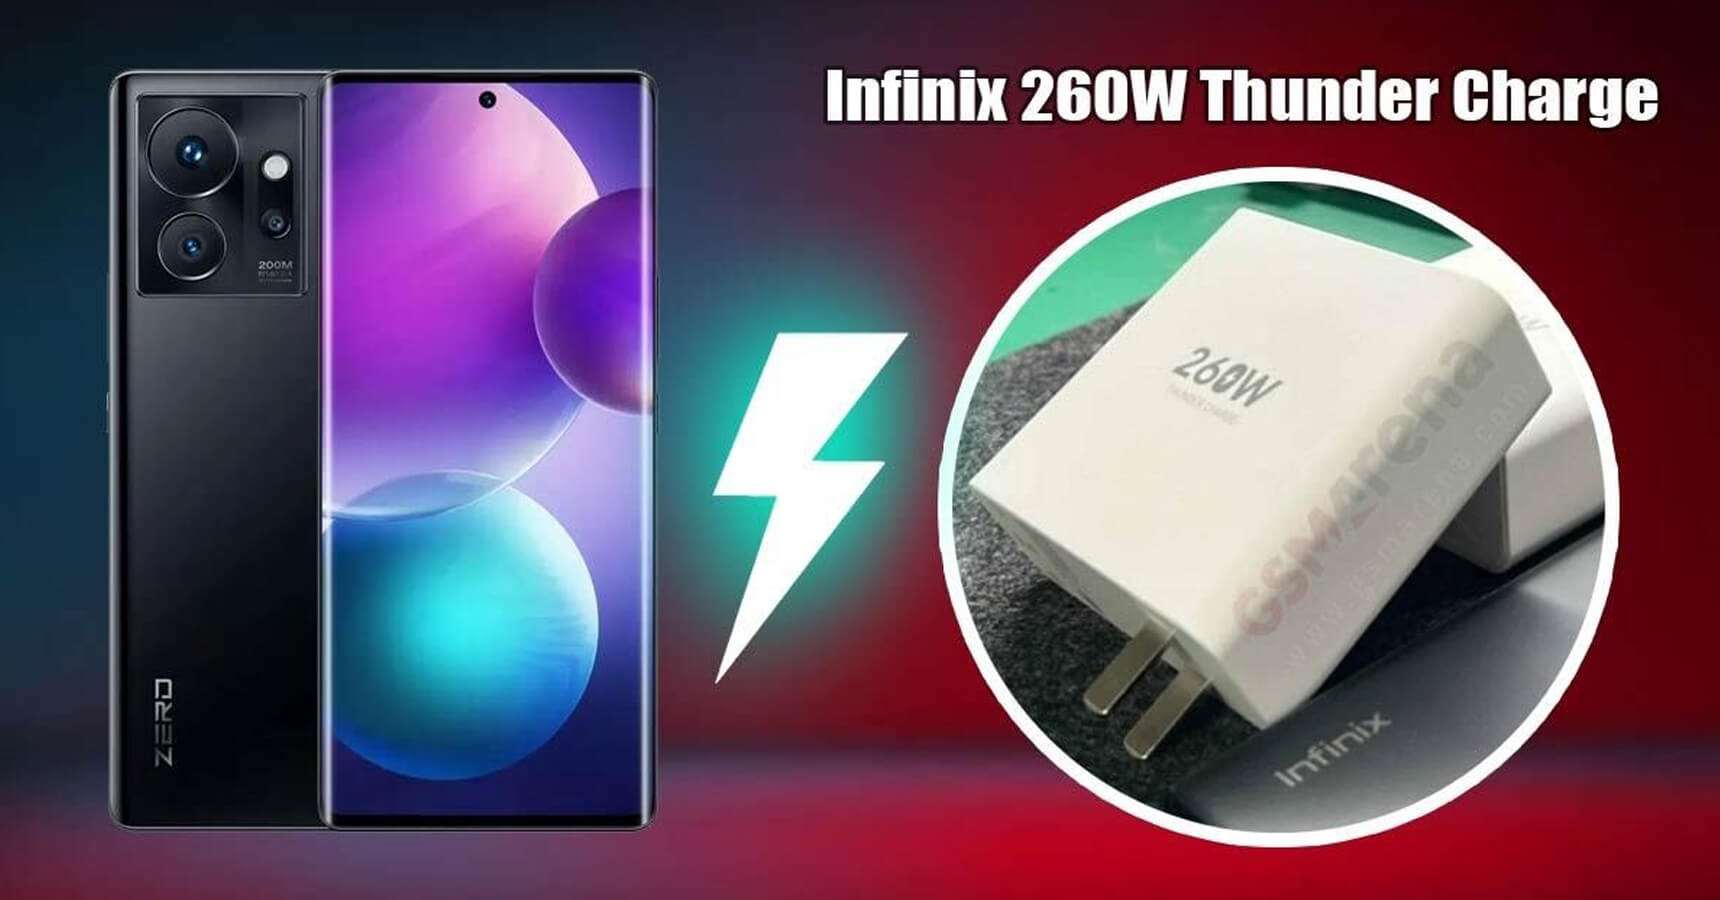 Infinix Plans introduce 260w Charging Technology